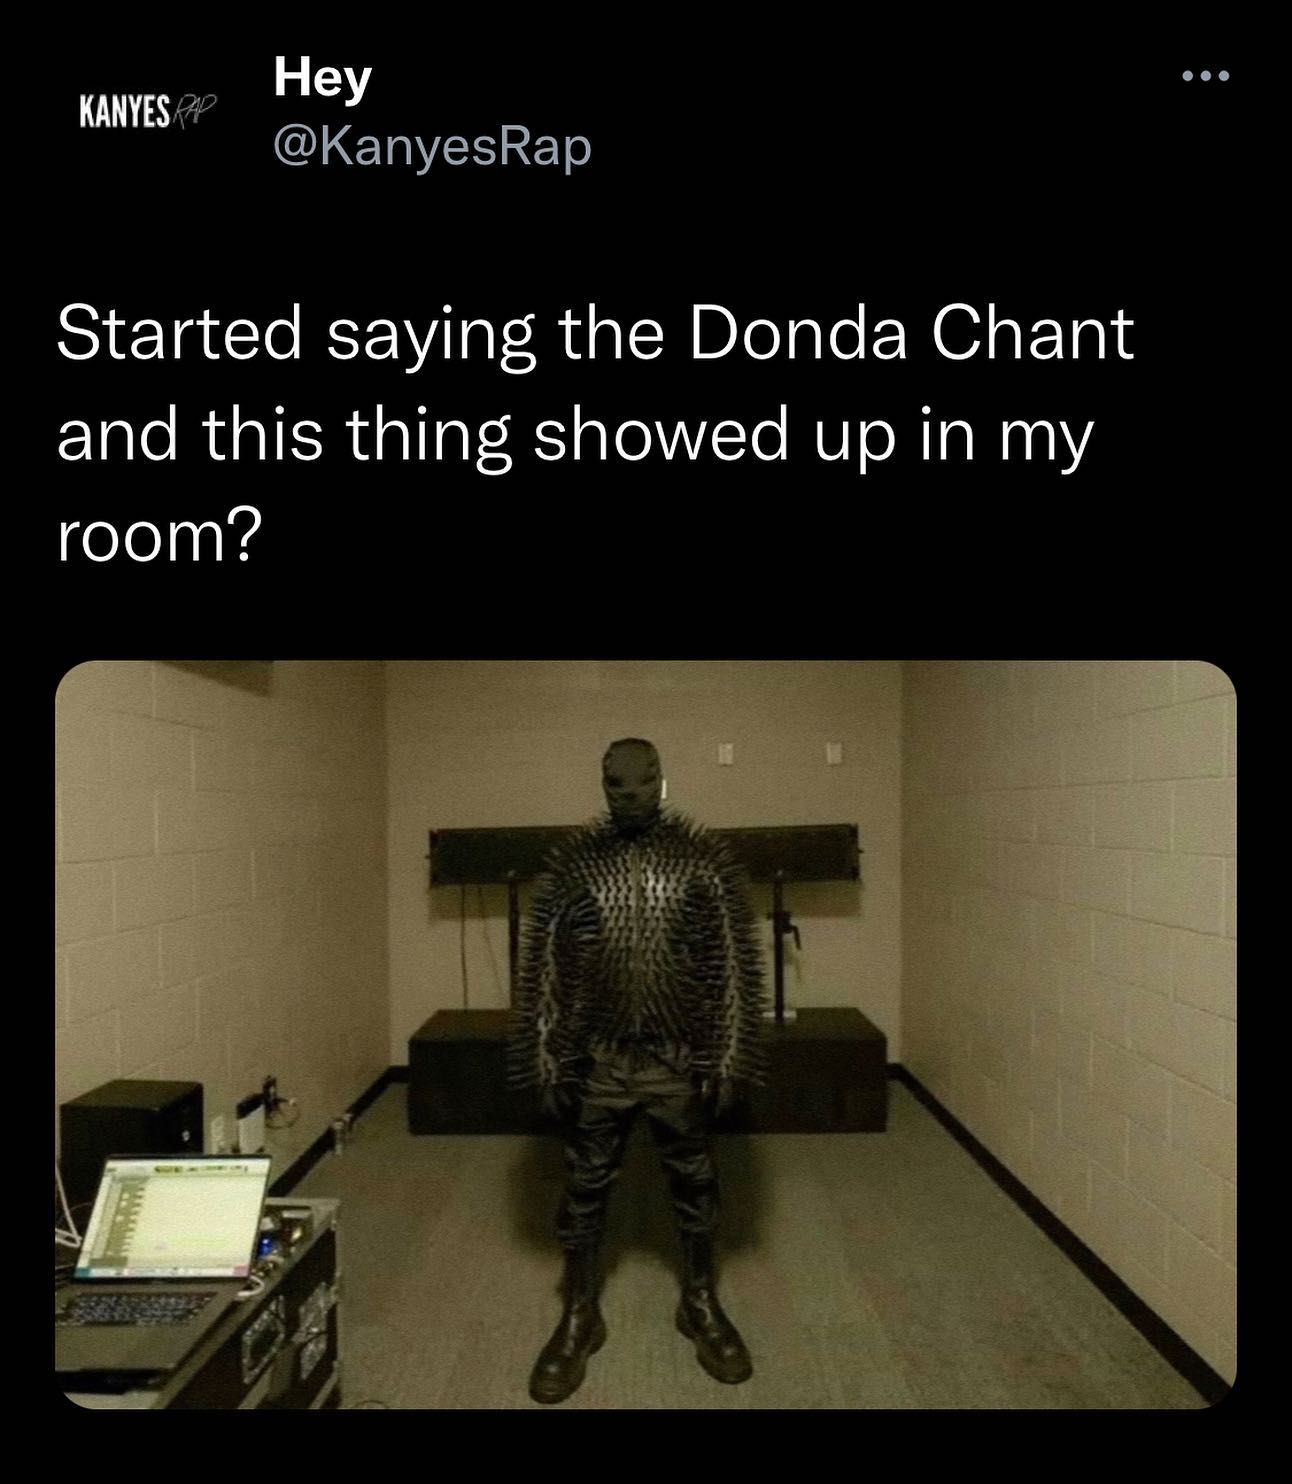 Kanye West Donda Memes - Kanye West standing backstage in an allblack outfit with the text 'starting chanting donda and kanye appeared'